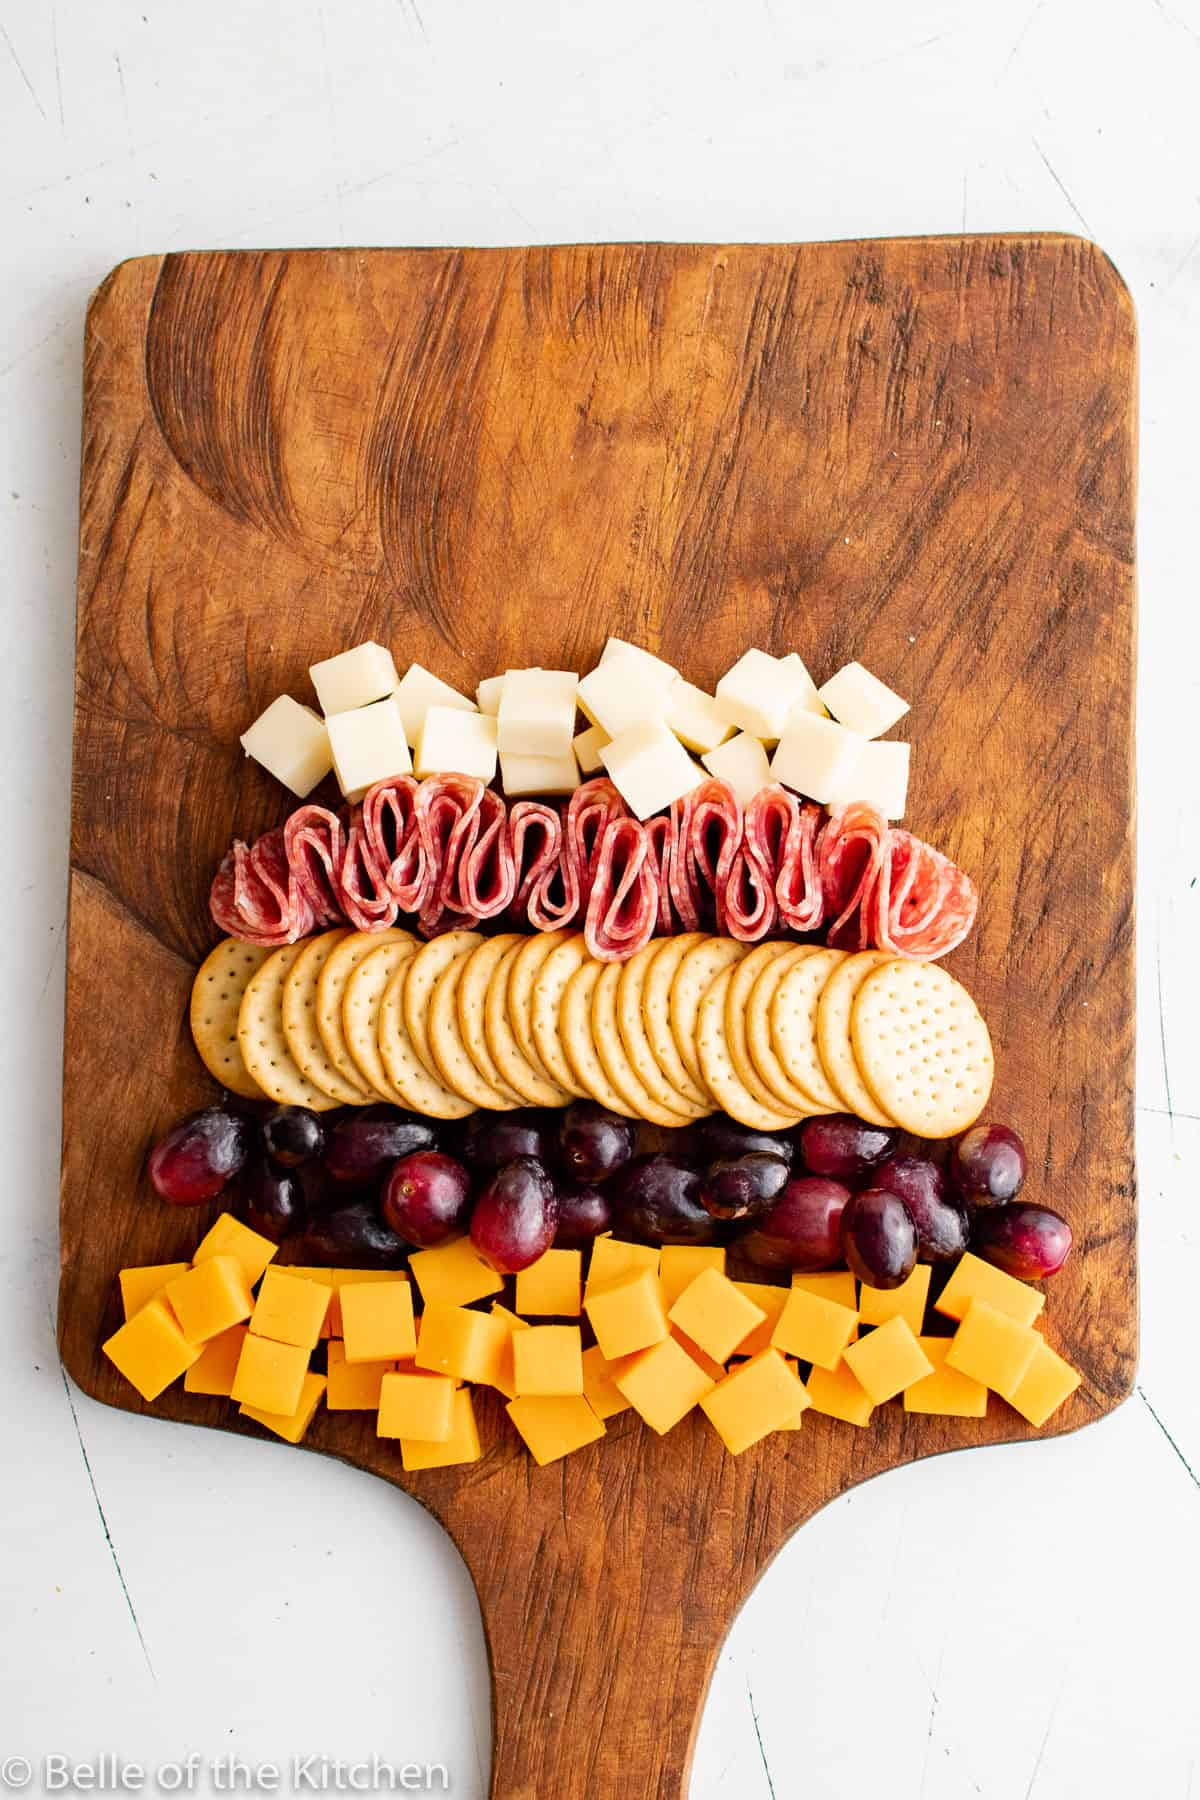 cut up cheese cubes, grapes, crackers, and salami on a wooden cutting board.